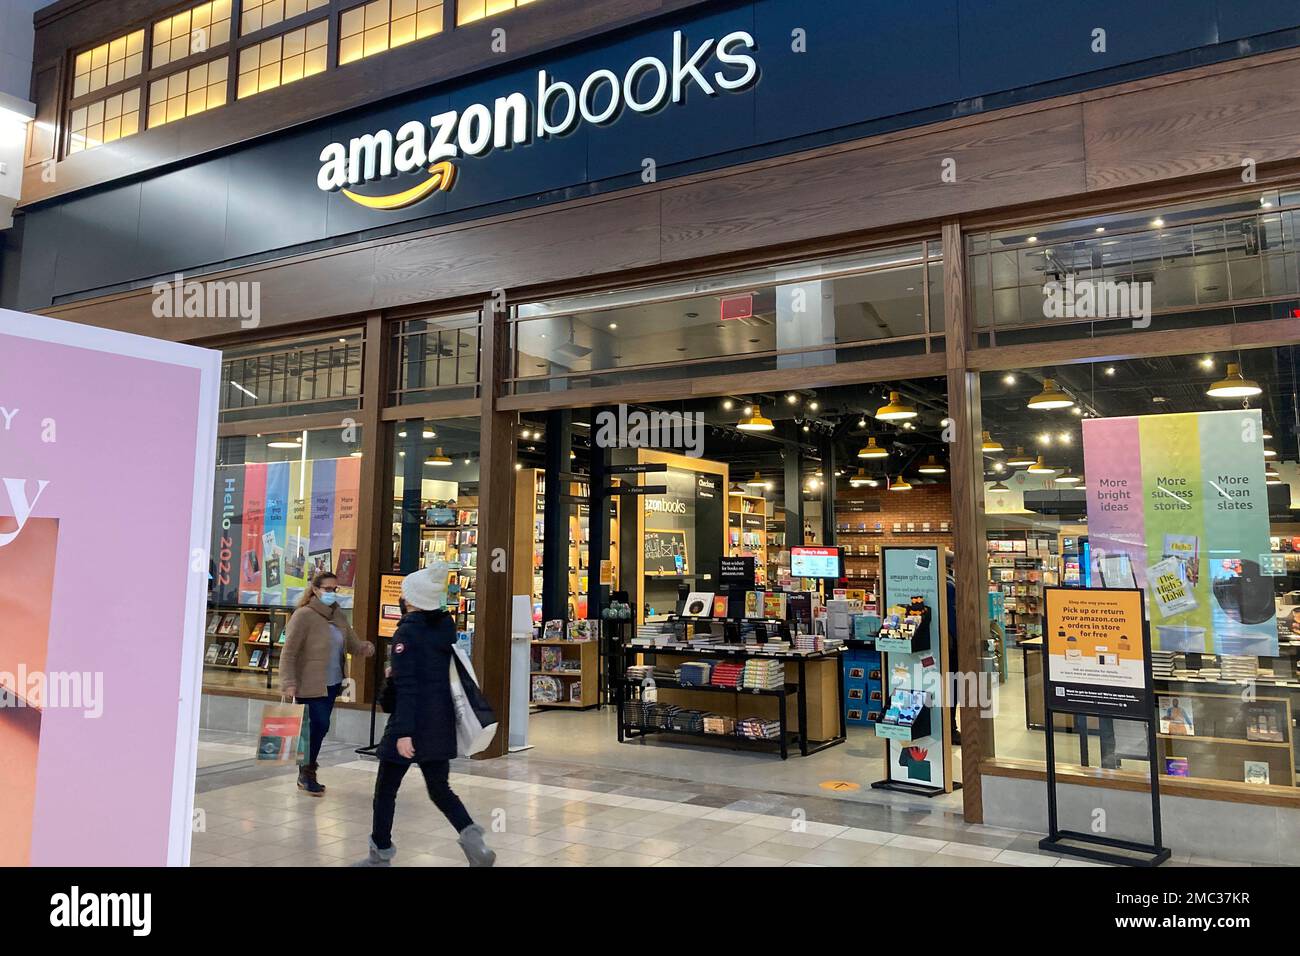 FILE - People walk by an Amazon Books store at the Westfield Garden State  Plaza shopping mall in Paramus, N.J., Monday, Jan. 10, 2022. Amazon  confirmed on Wednesday, March 2, 2022, that